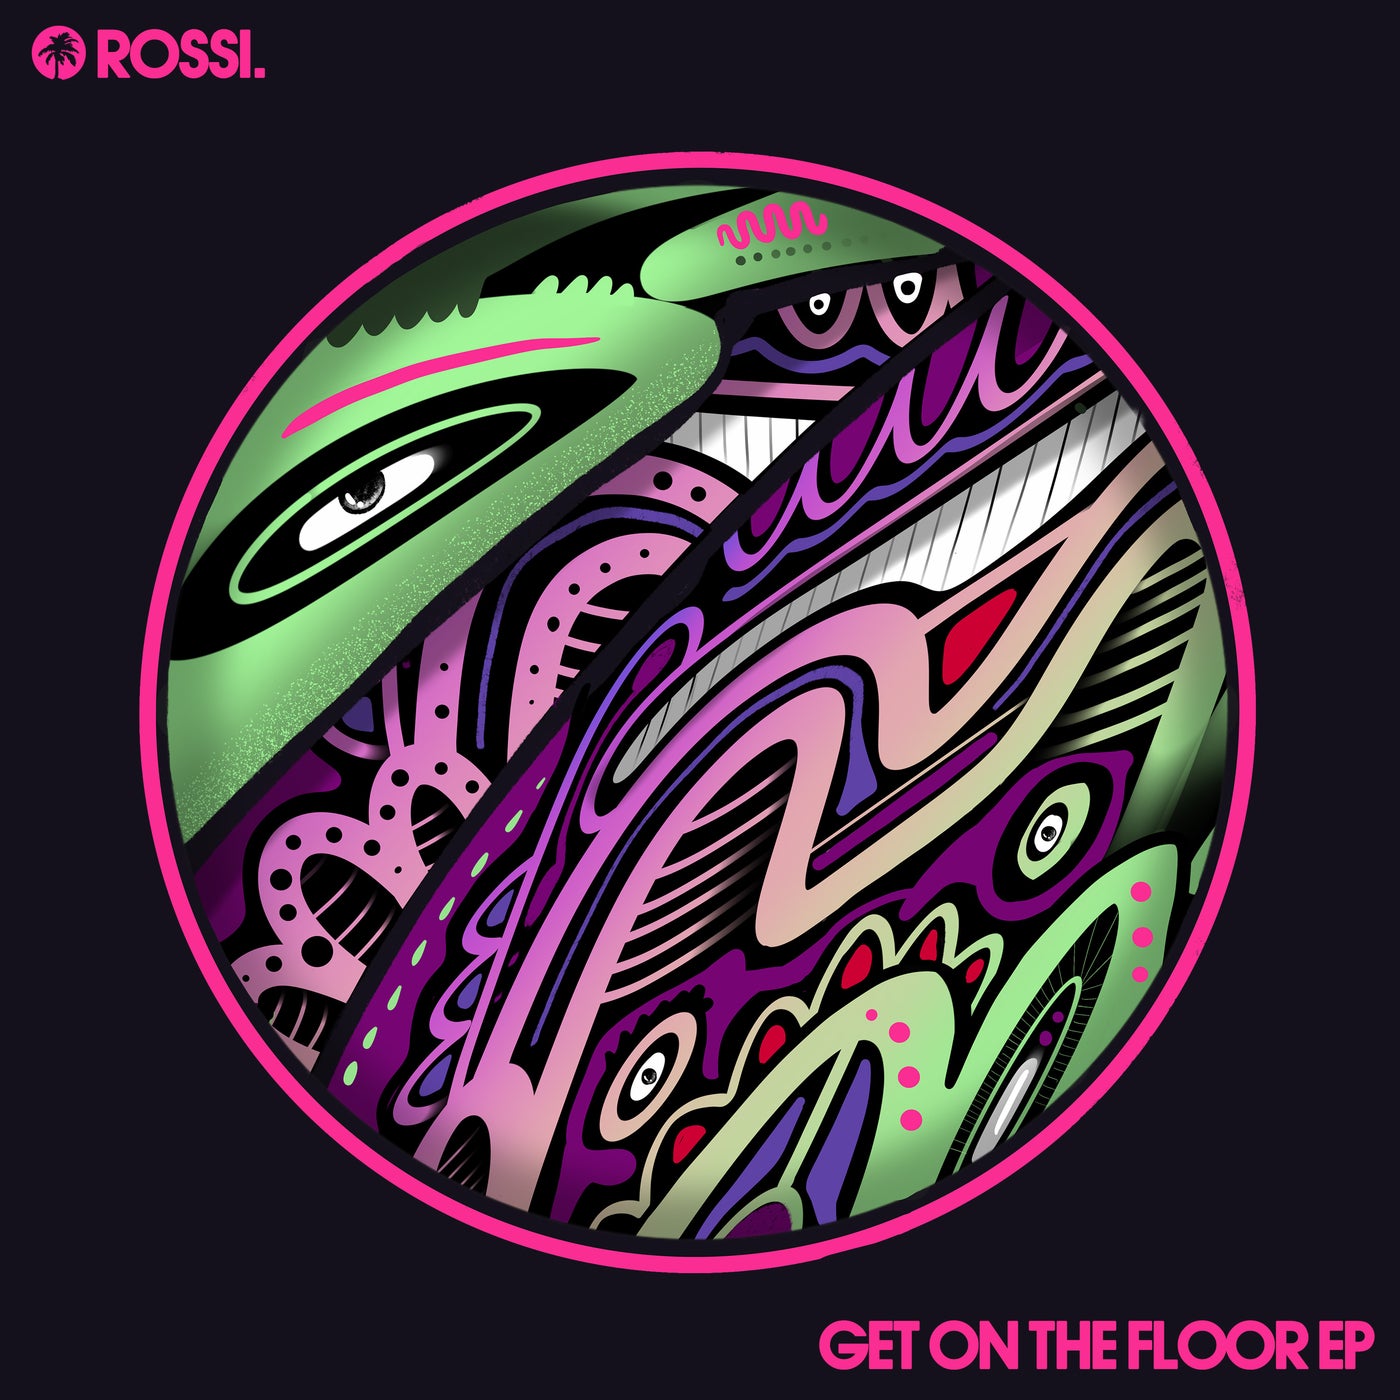 Get On The Floor EP